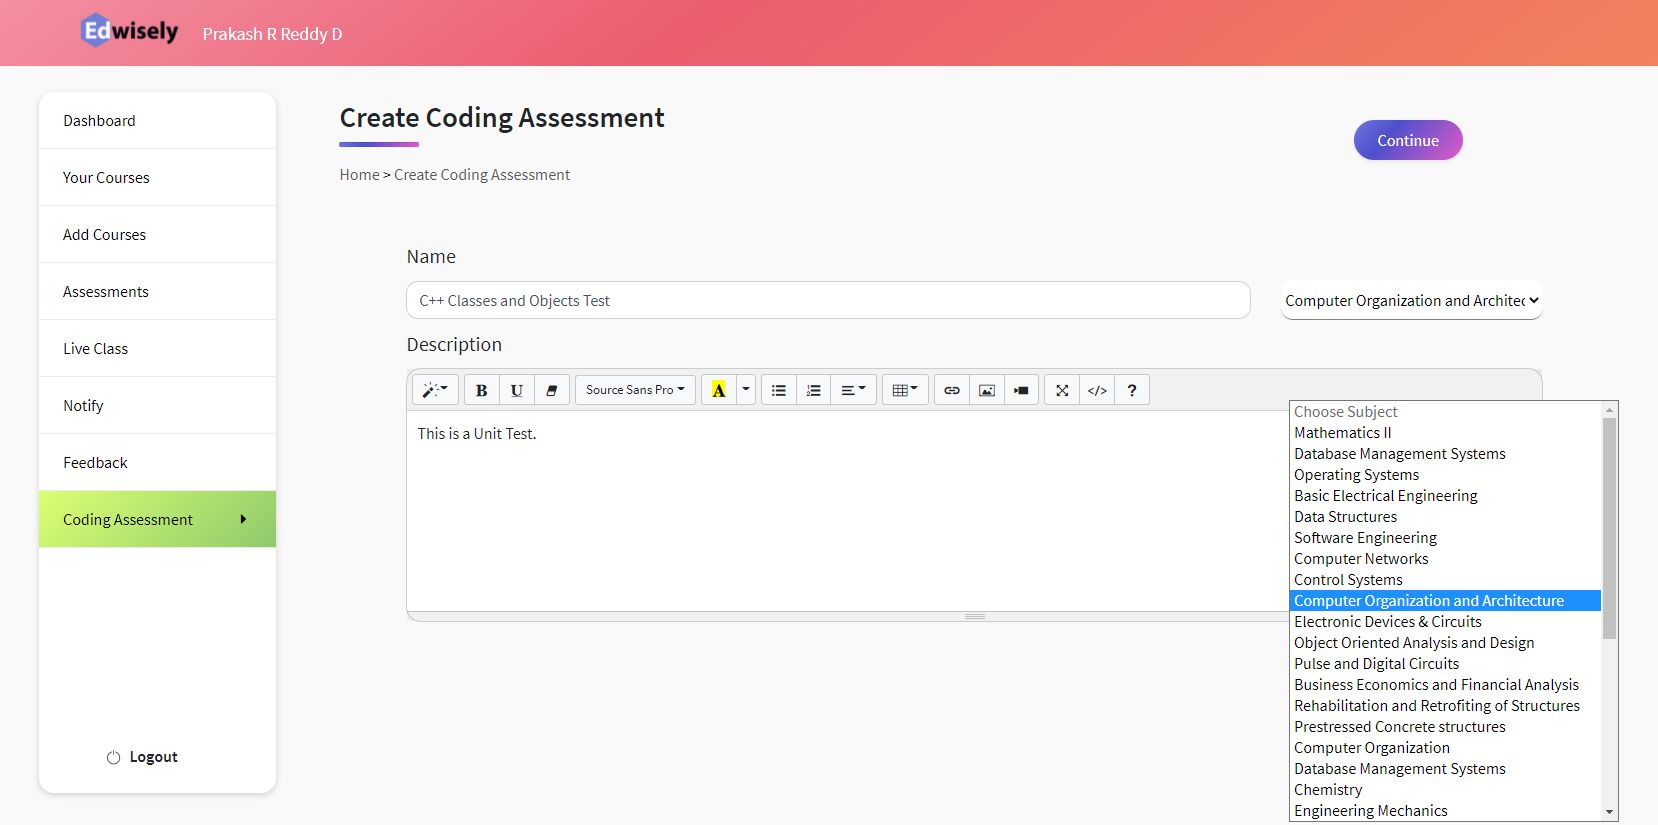 Step 1 – Create New Coding Assessment